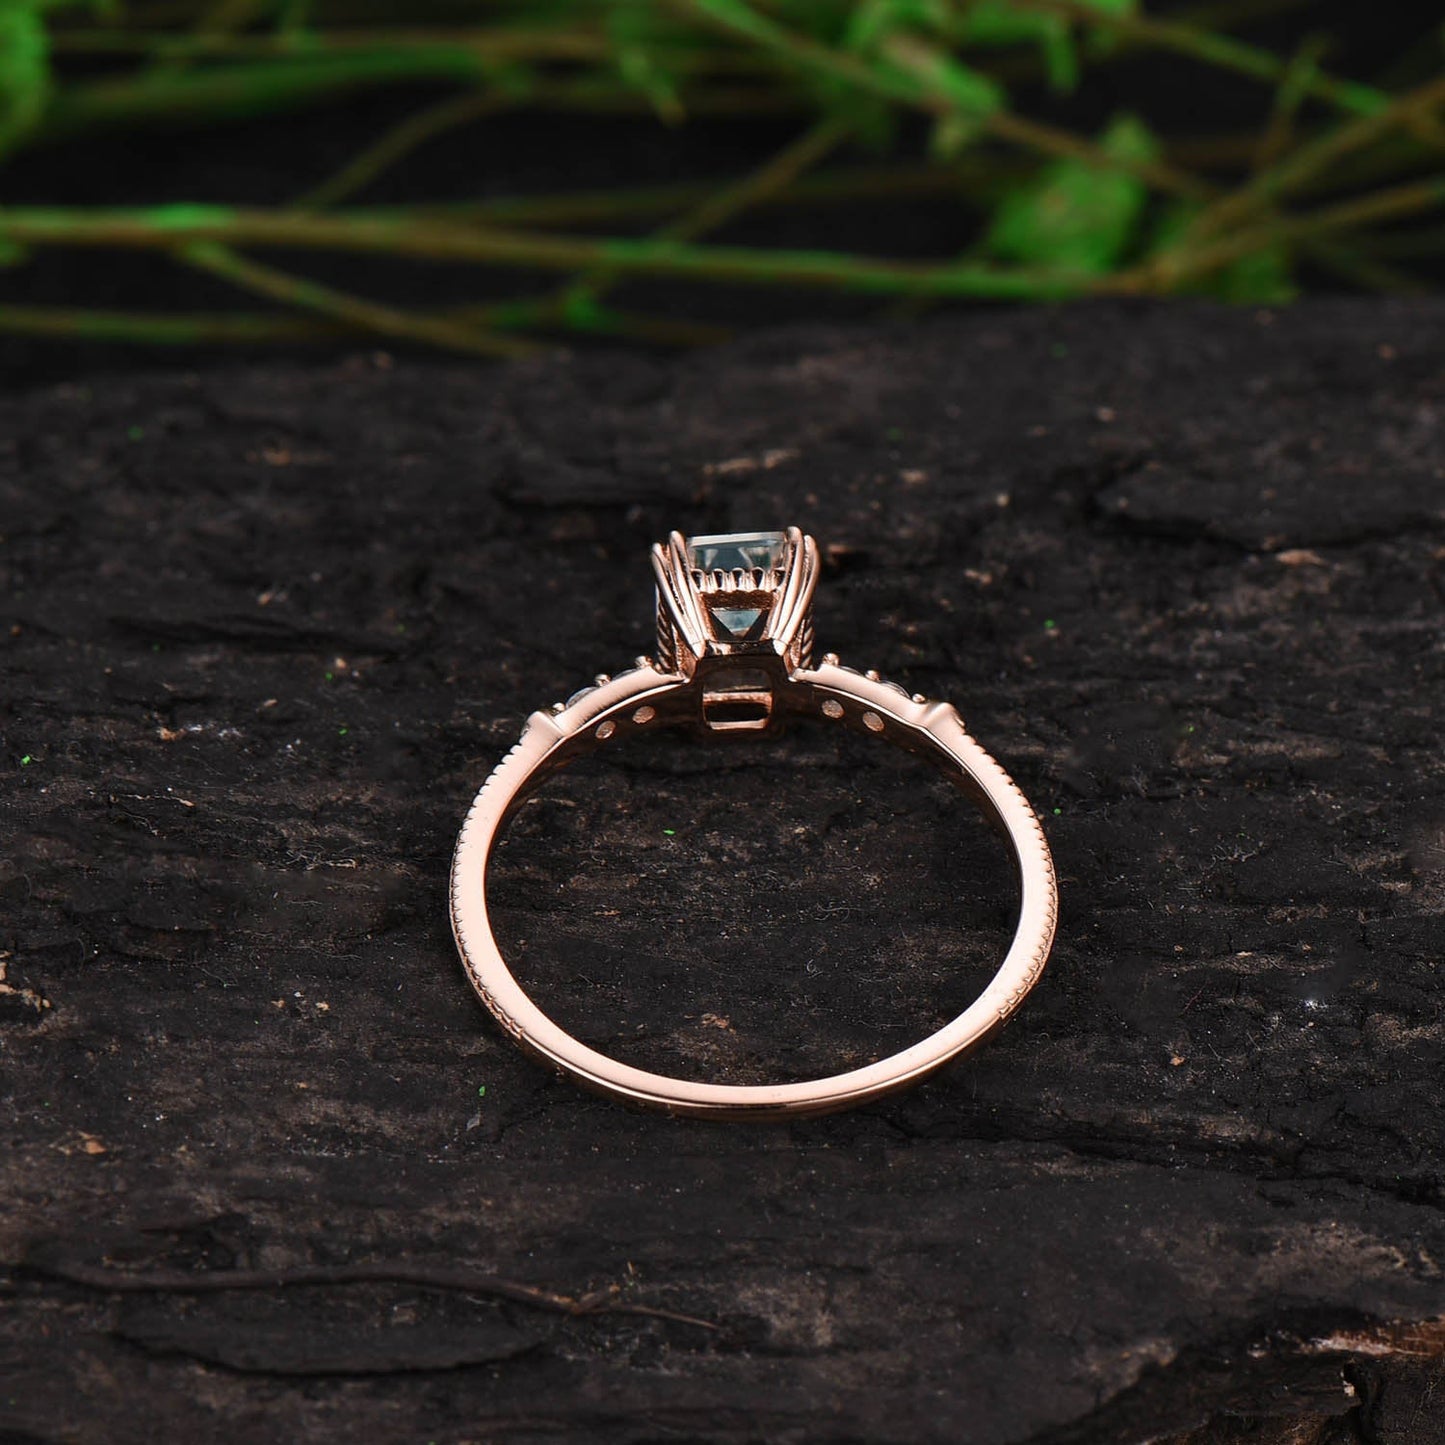 Vintage emerald cut Alexandrite engagement ring Alexandrite ring rose gold for women five stone unique ring Alexandrite jewelry bridal ring